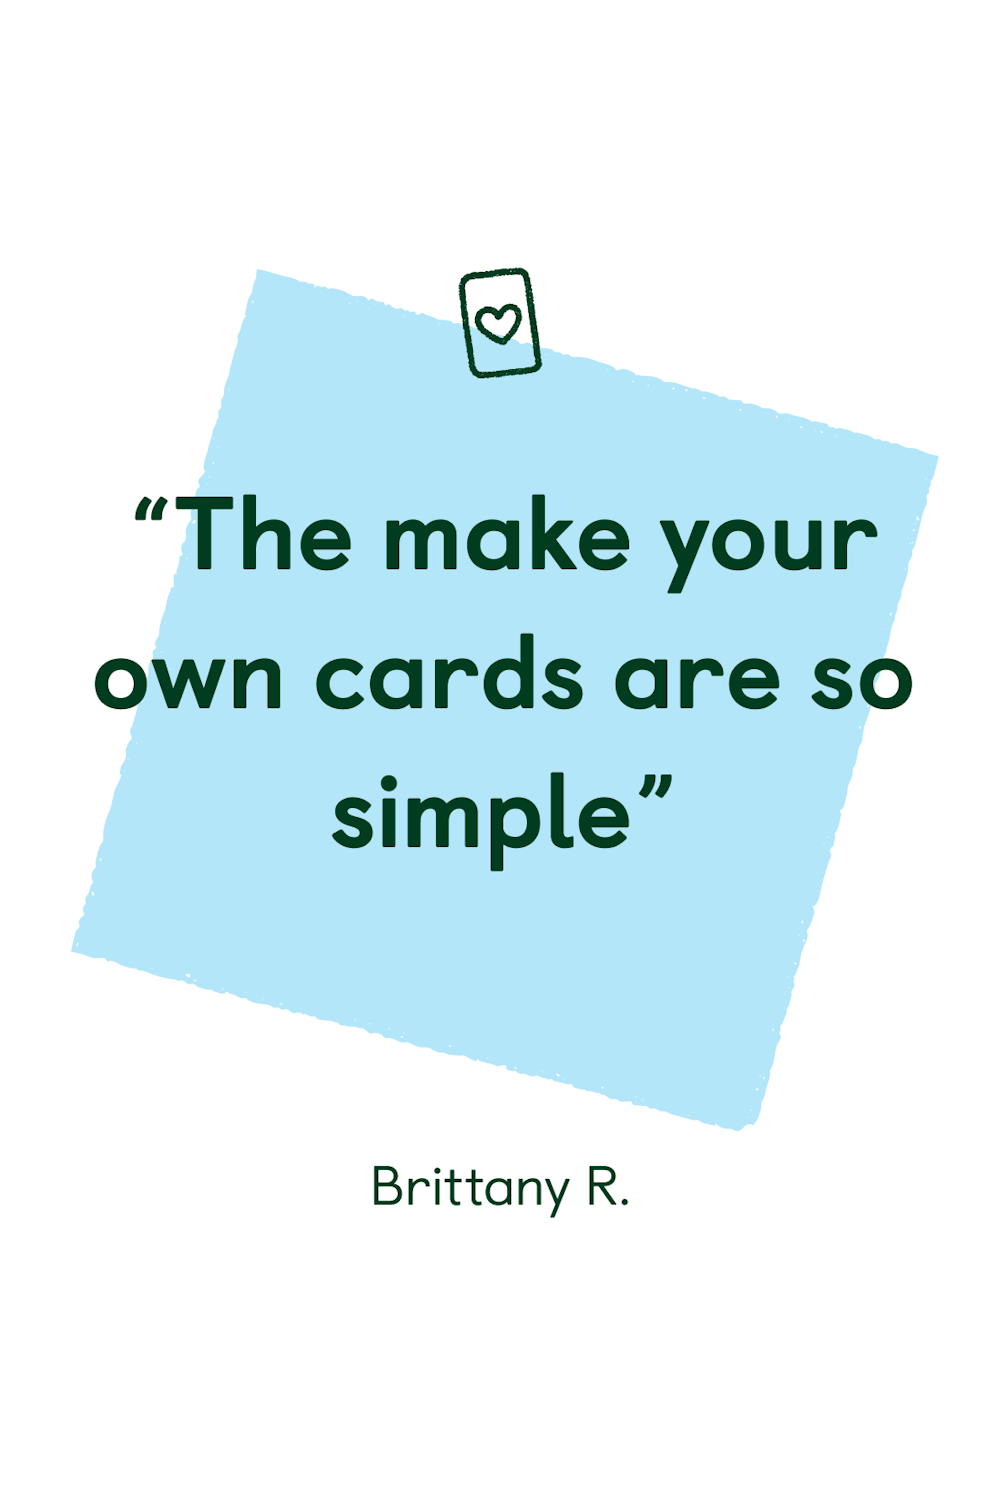 "The make your own cards are so simple"